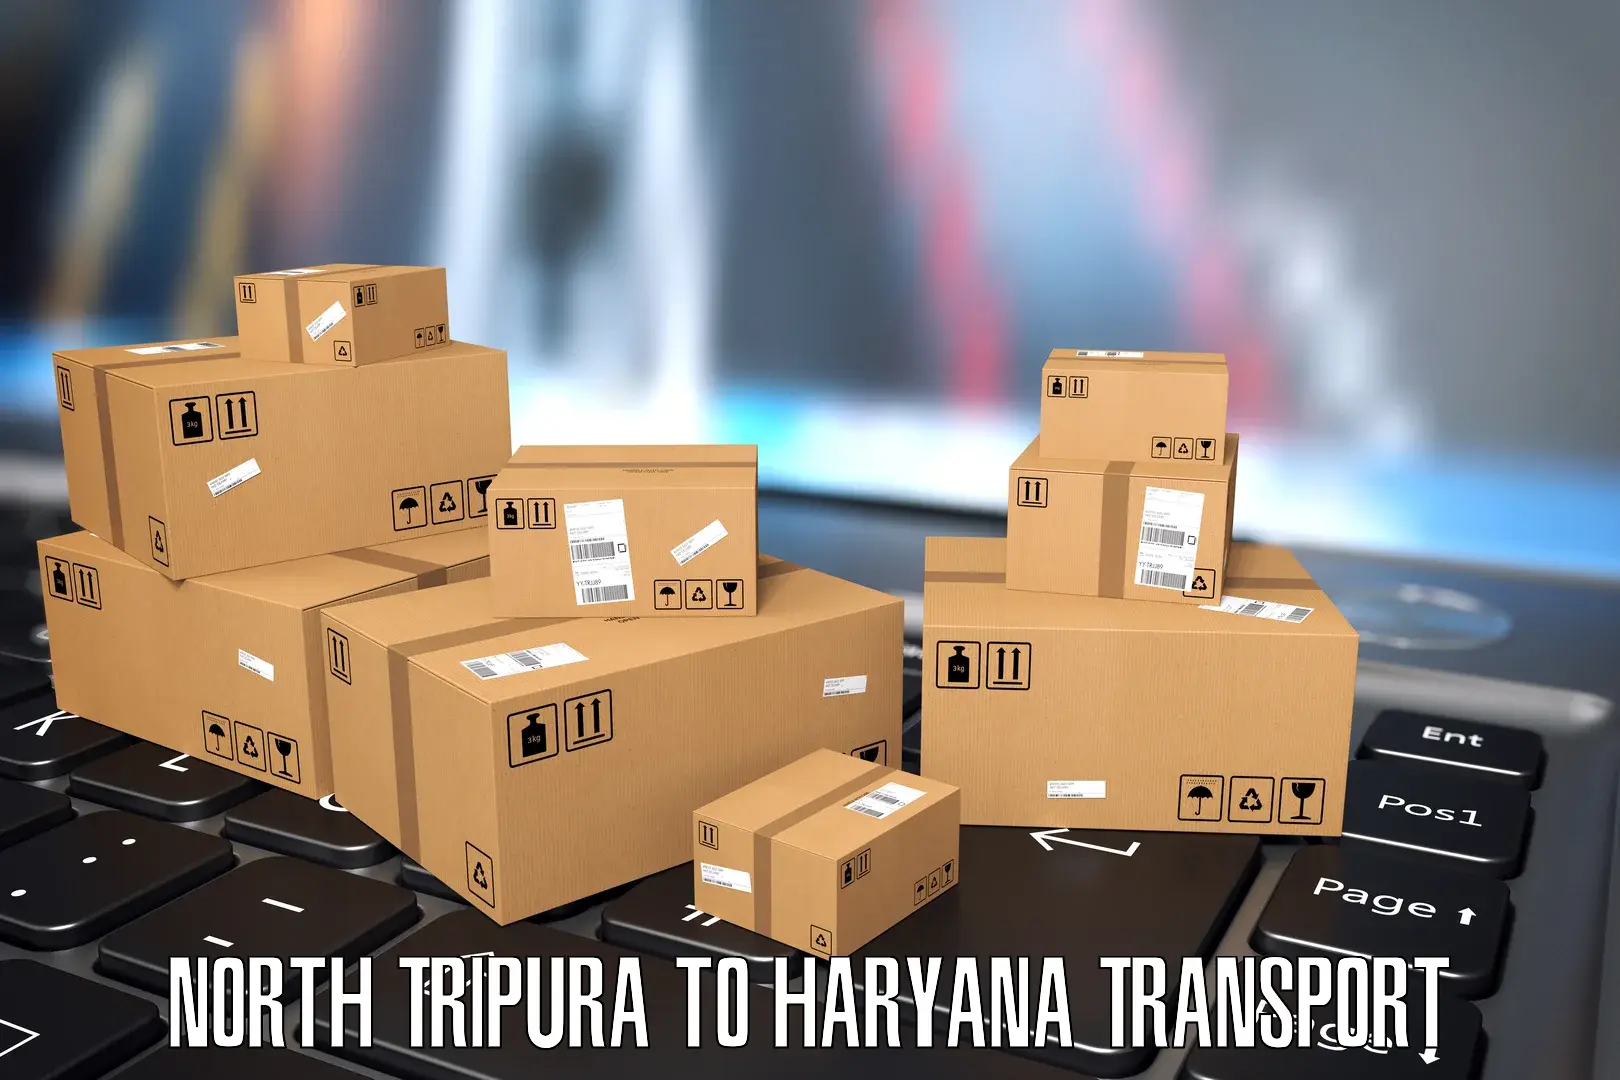 Air freight transport services North Tripura to NCR Haryana